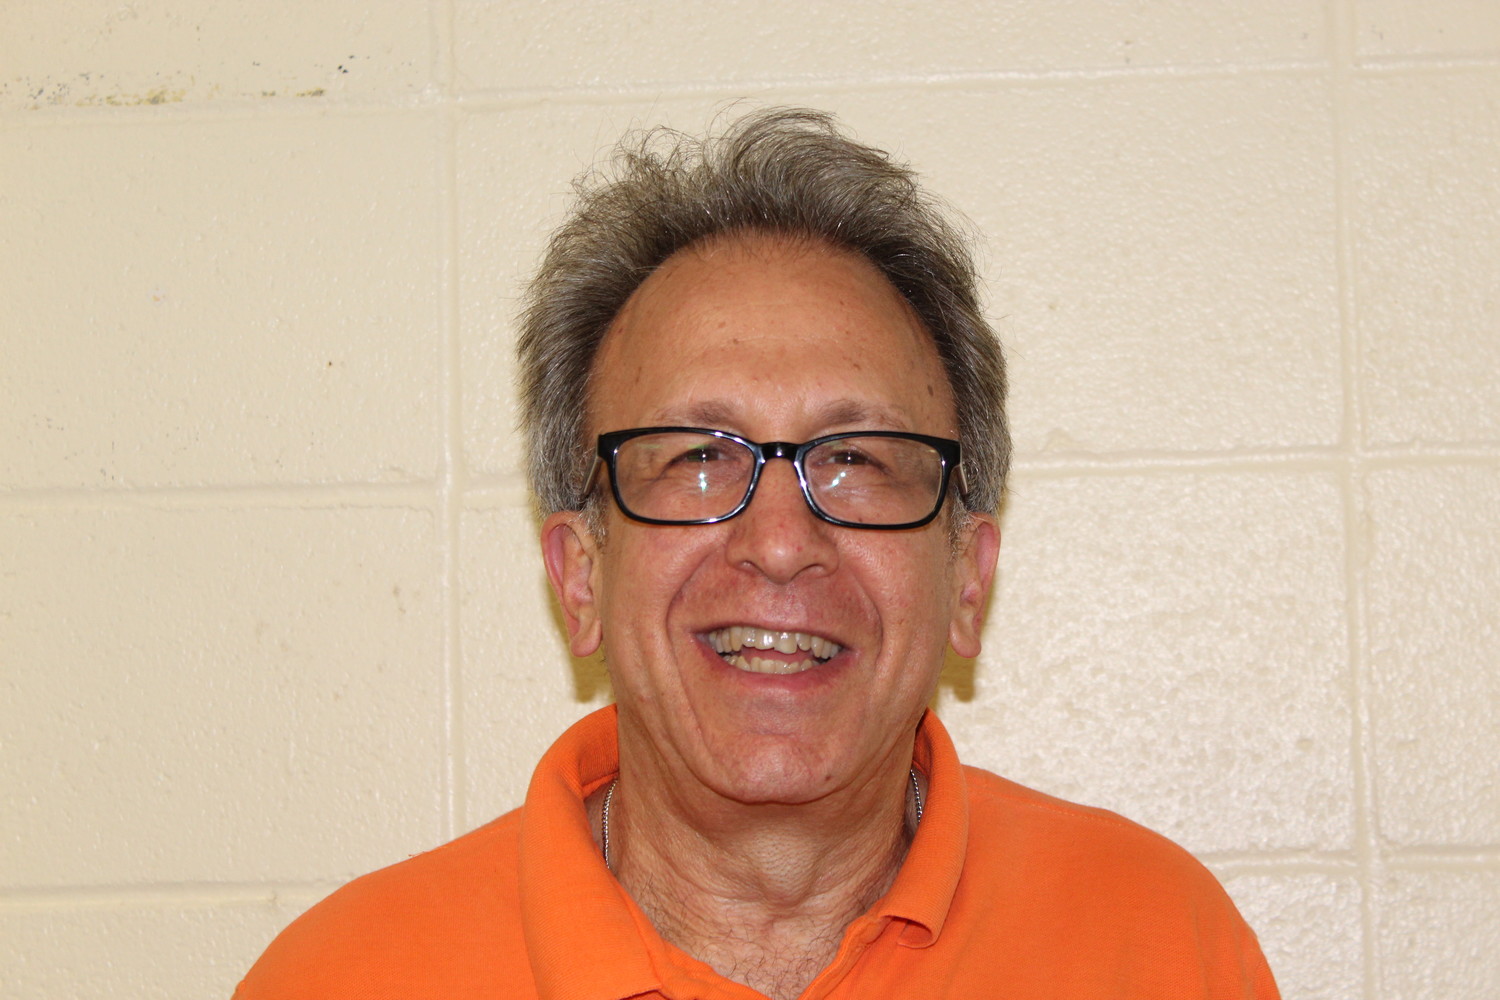 Lynbrook candidate (uncontested):
Robert Paskoff
Age: 59
Family: Wife, Jayne; children Jeremy, 25, Rose, 23, and Walter, 18
Years living in district: Born and raised in Lynbrook. Graduated from LHS in 1976. Has lived in Lynbrook with his family since 2002.
Highest degree earned: Master of Arts from Columbia University ‘s Teachers College
Profession: Pediatric physical therapist
Community involvement:
 • Coach of Lynbrook/East Rockaway Soccer                                                              Club and St. Raymond’s Catholic Youth 
Organization basketball
 • President of Lynbrook XC and TF Supporters, which raises money for the boys’ and girls’ cross-country and track and field teams.